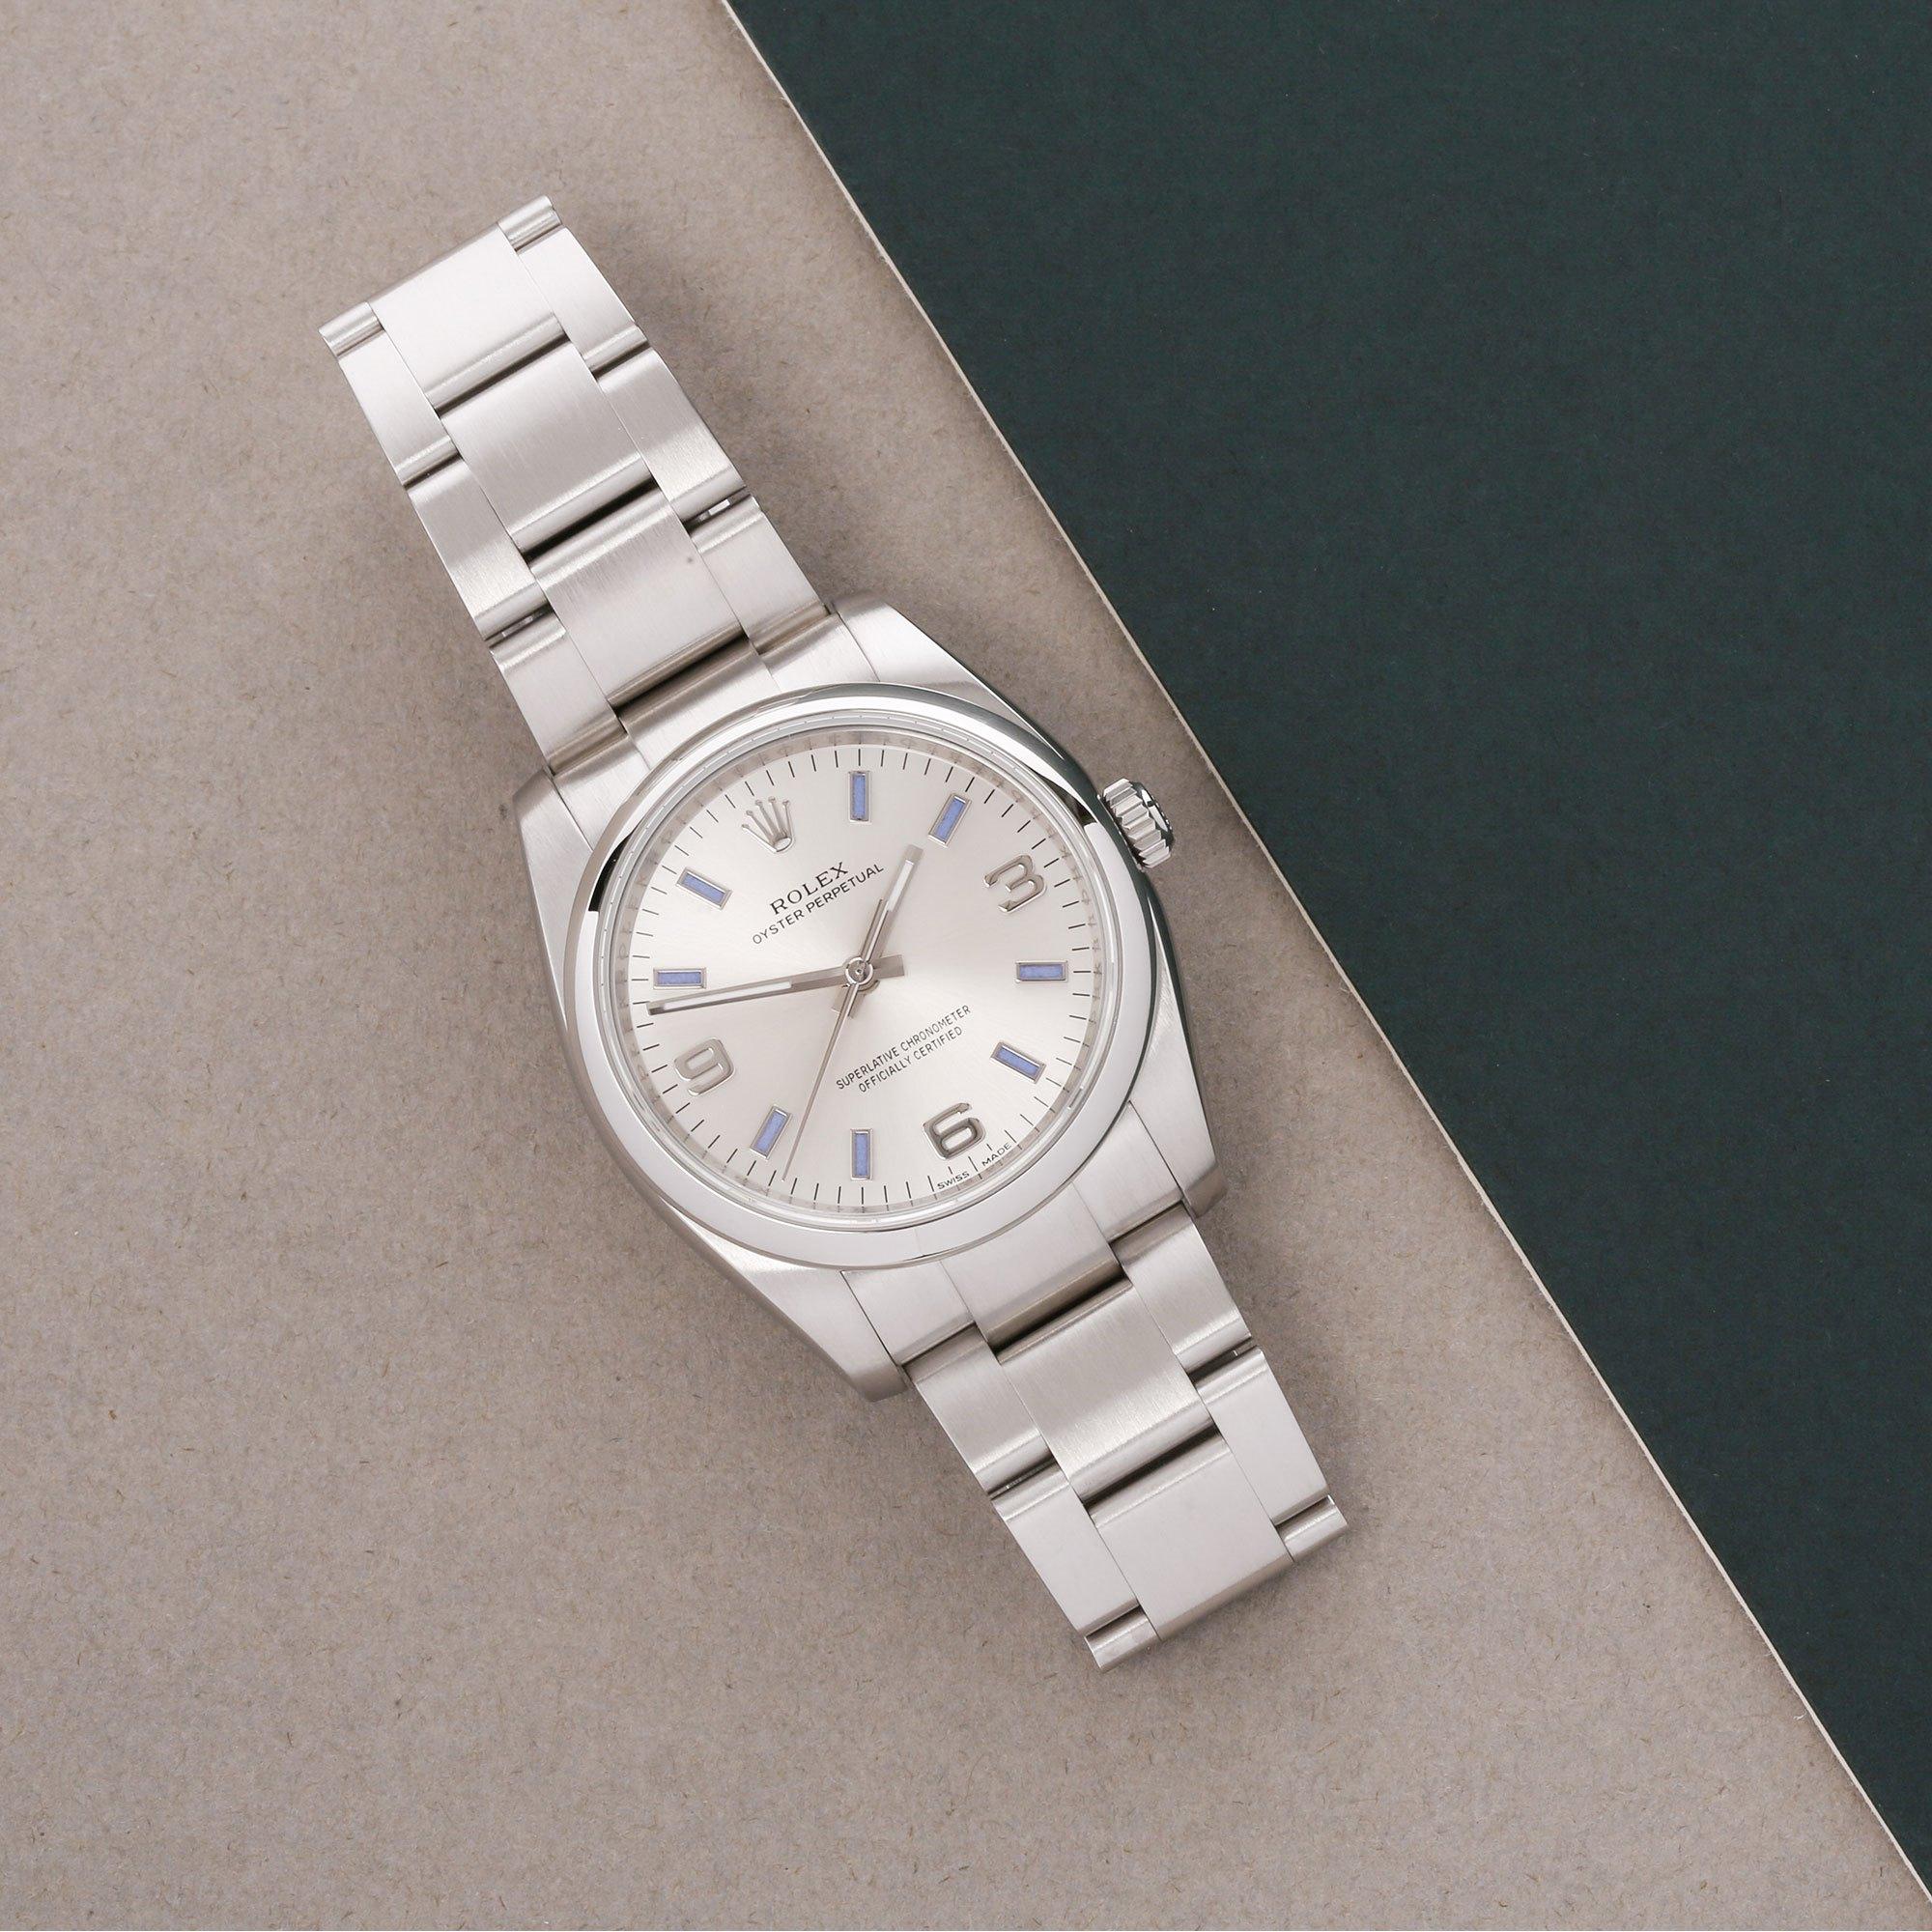 Xupes Reference: W007674
Manufacturer: Rolex
Model: Air-King
Model Variant: 35
Model Number: 114200
Age: 2010
Gender: Unisex
Complete With: Rolex Service Pouch 
Dial: Silver Baton
Glass: Sapphire Crystal
Case Size: 34mm
Case Material: Stainless